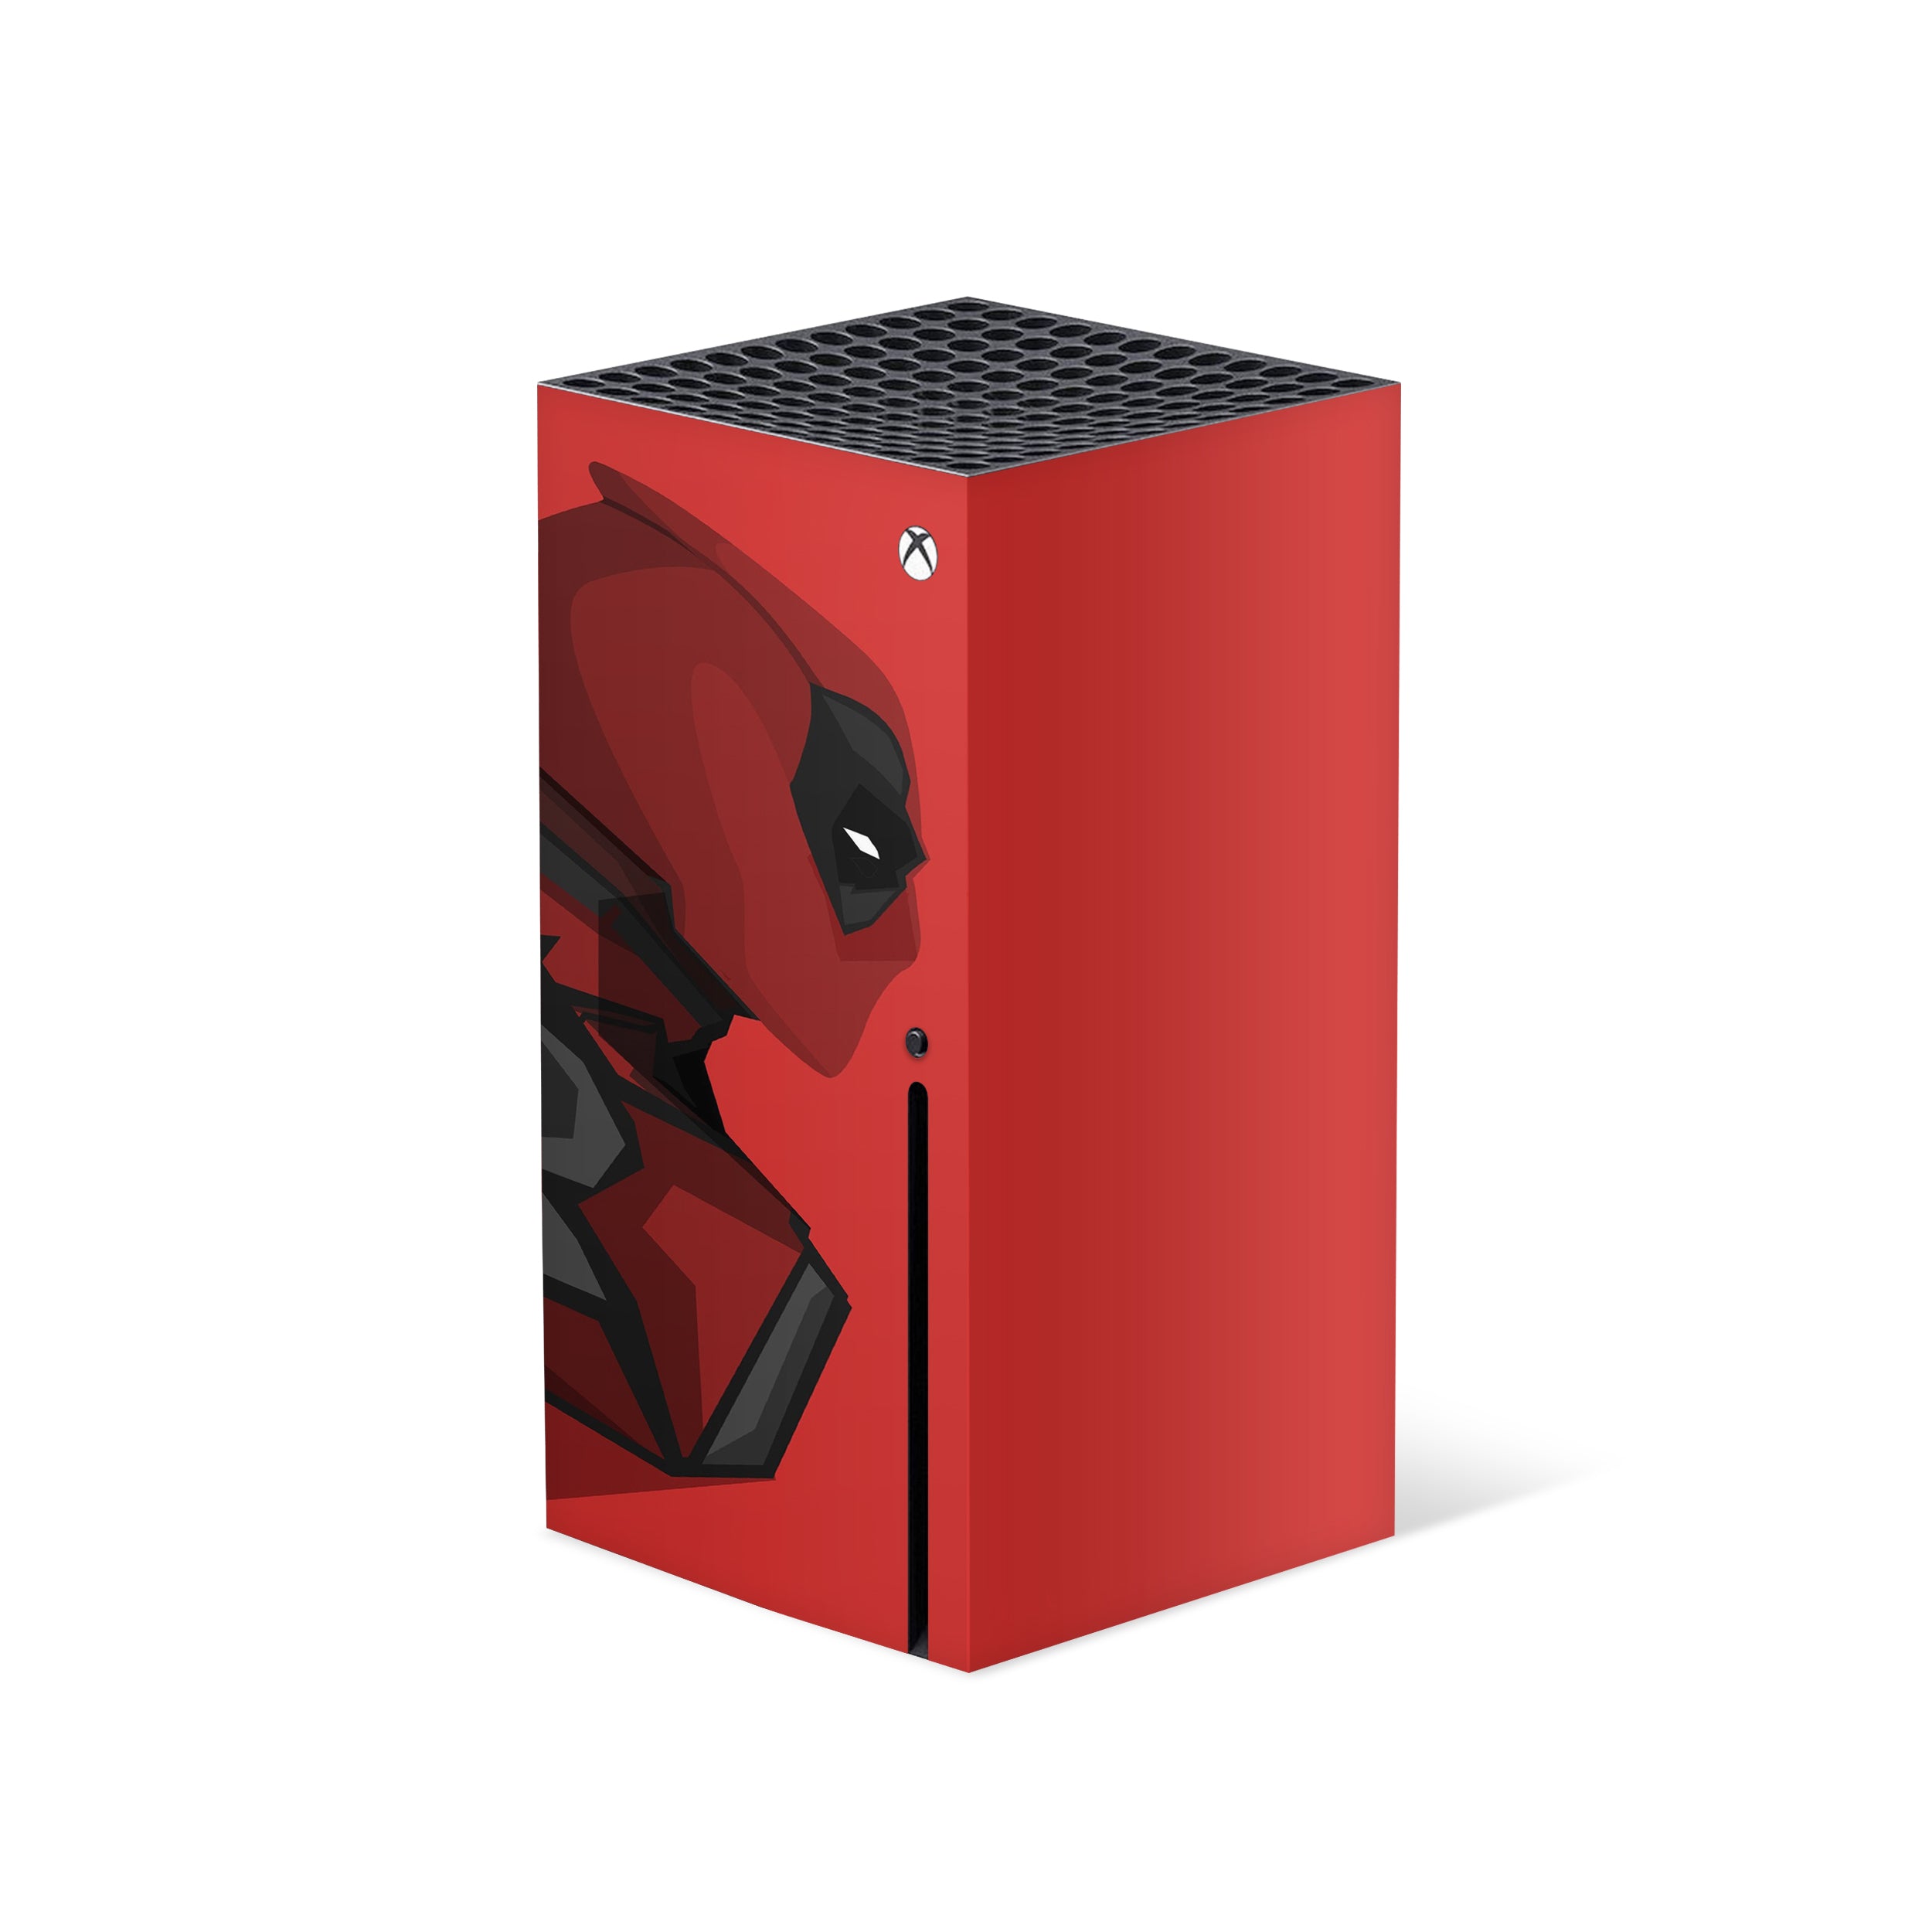 A video game skin featuring a Marvel Comics Deadpool design for the Xbox Series X.